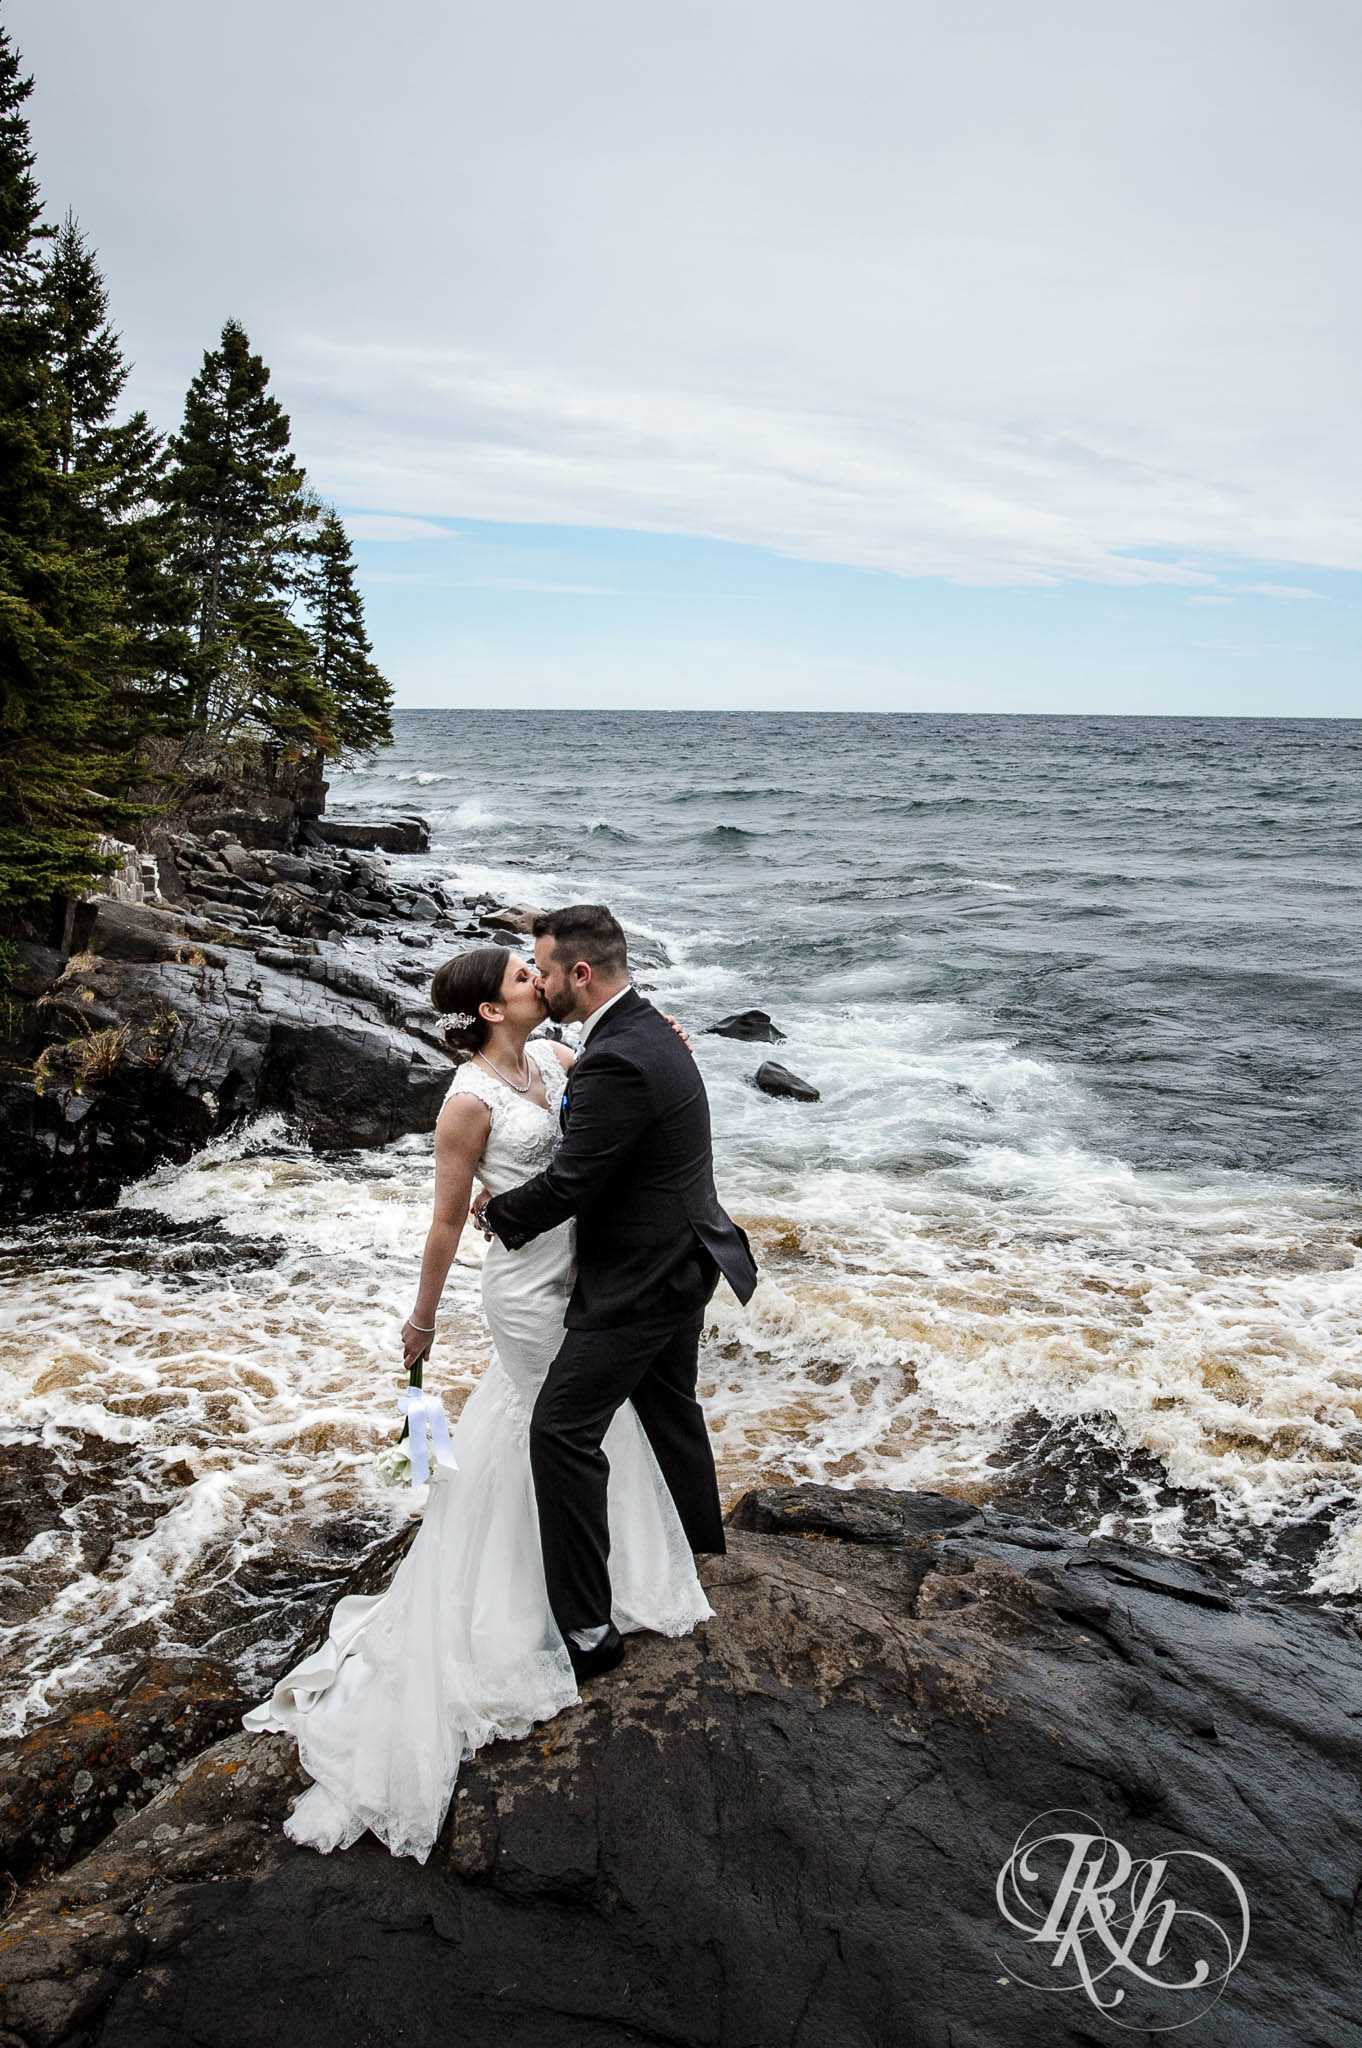 Bride and groom kiss in front of Lake Superior in North Shore in Minnesota.